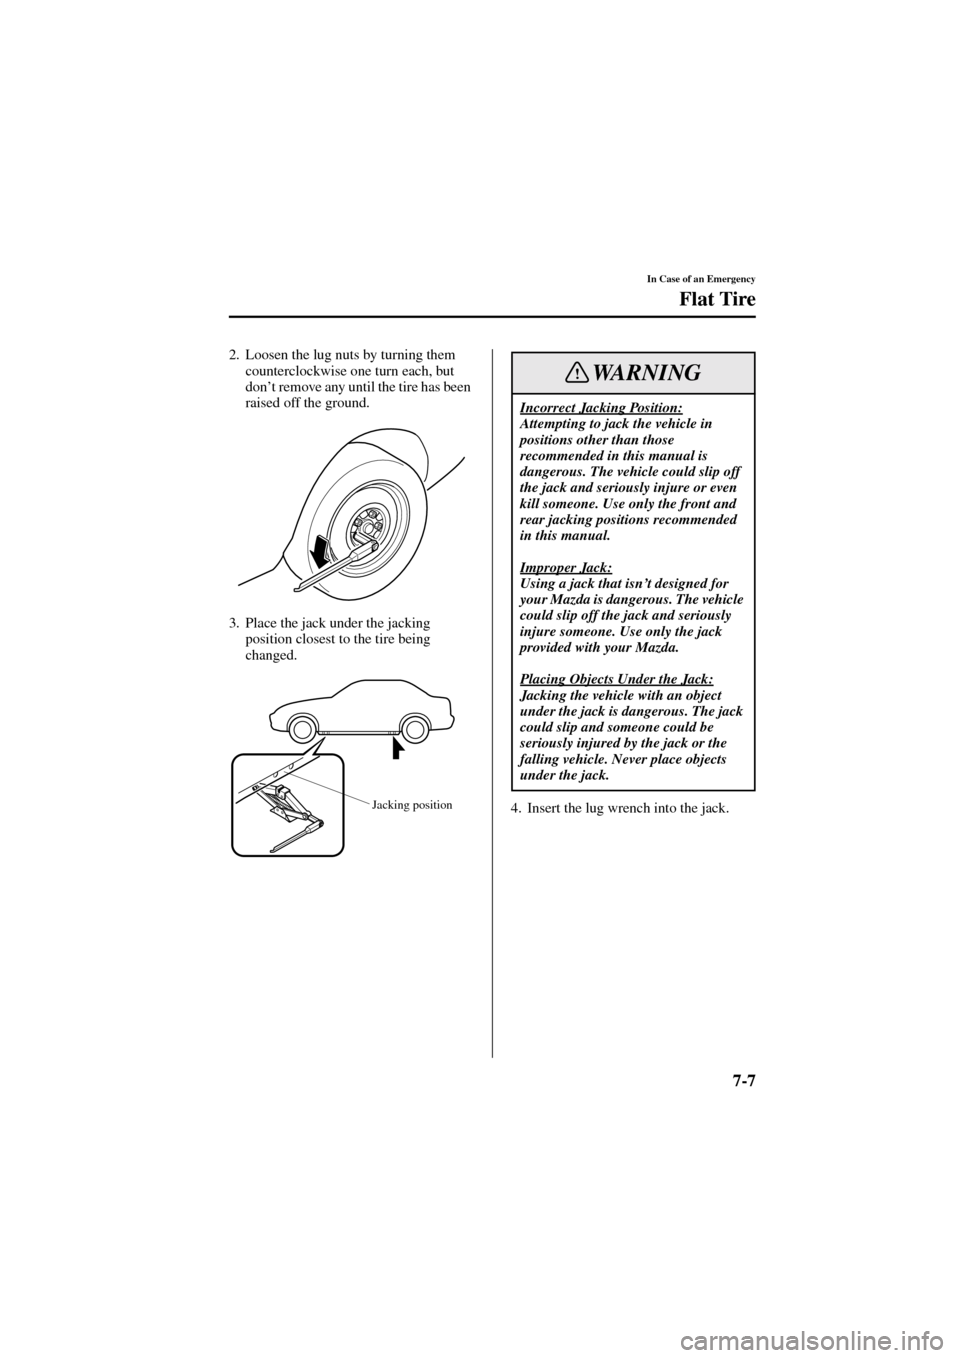 MAZDA MODEL 6 2004  Owners Manual (in English) 7-7
In Case of an Emergency
Flat Tire
Form No. 8R29-EA-02I
2. Loosen the lug nuts by turning them 
counterclockwise one turn each, but 
don’t remove any until the tire has been 
raised off the groun